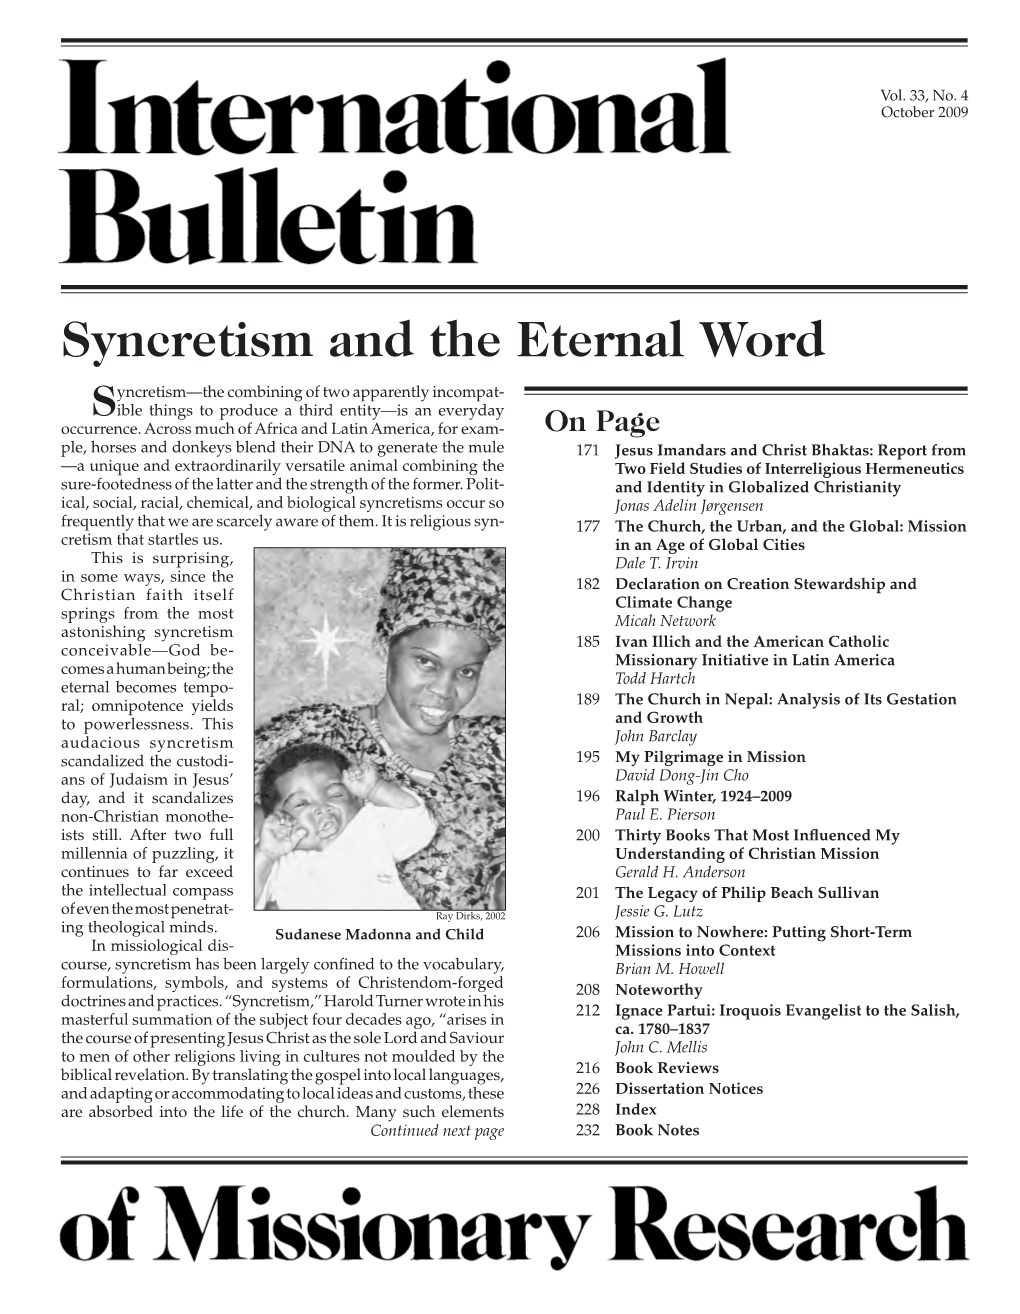 Syncretism and the Eternal Word